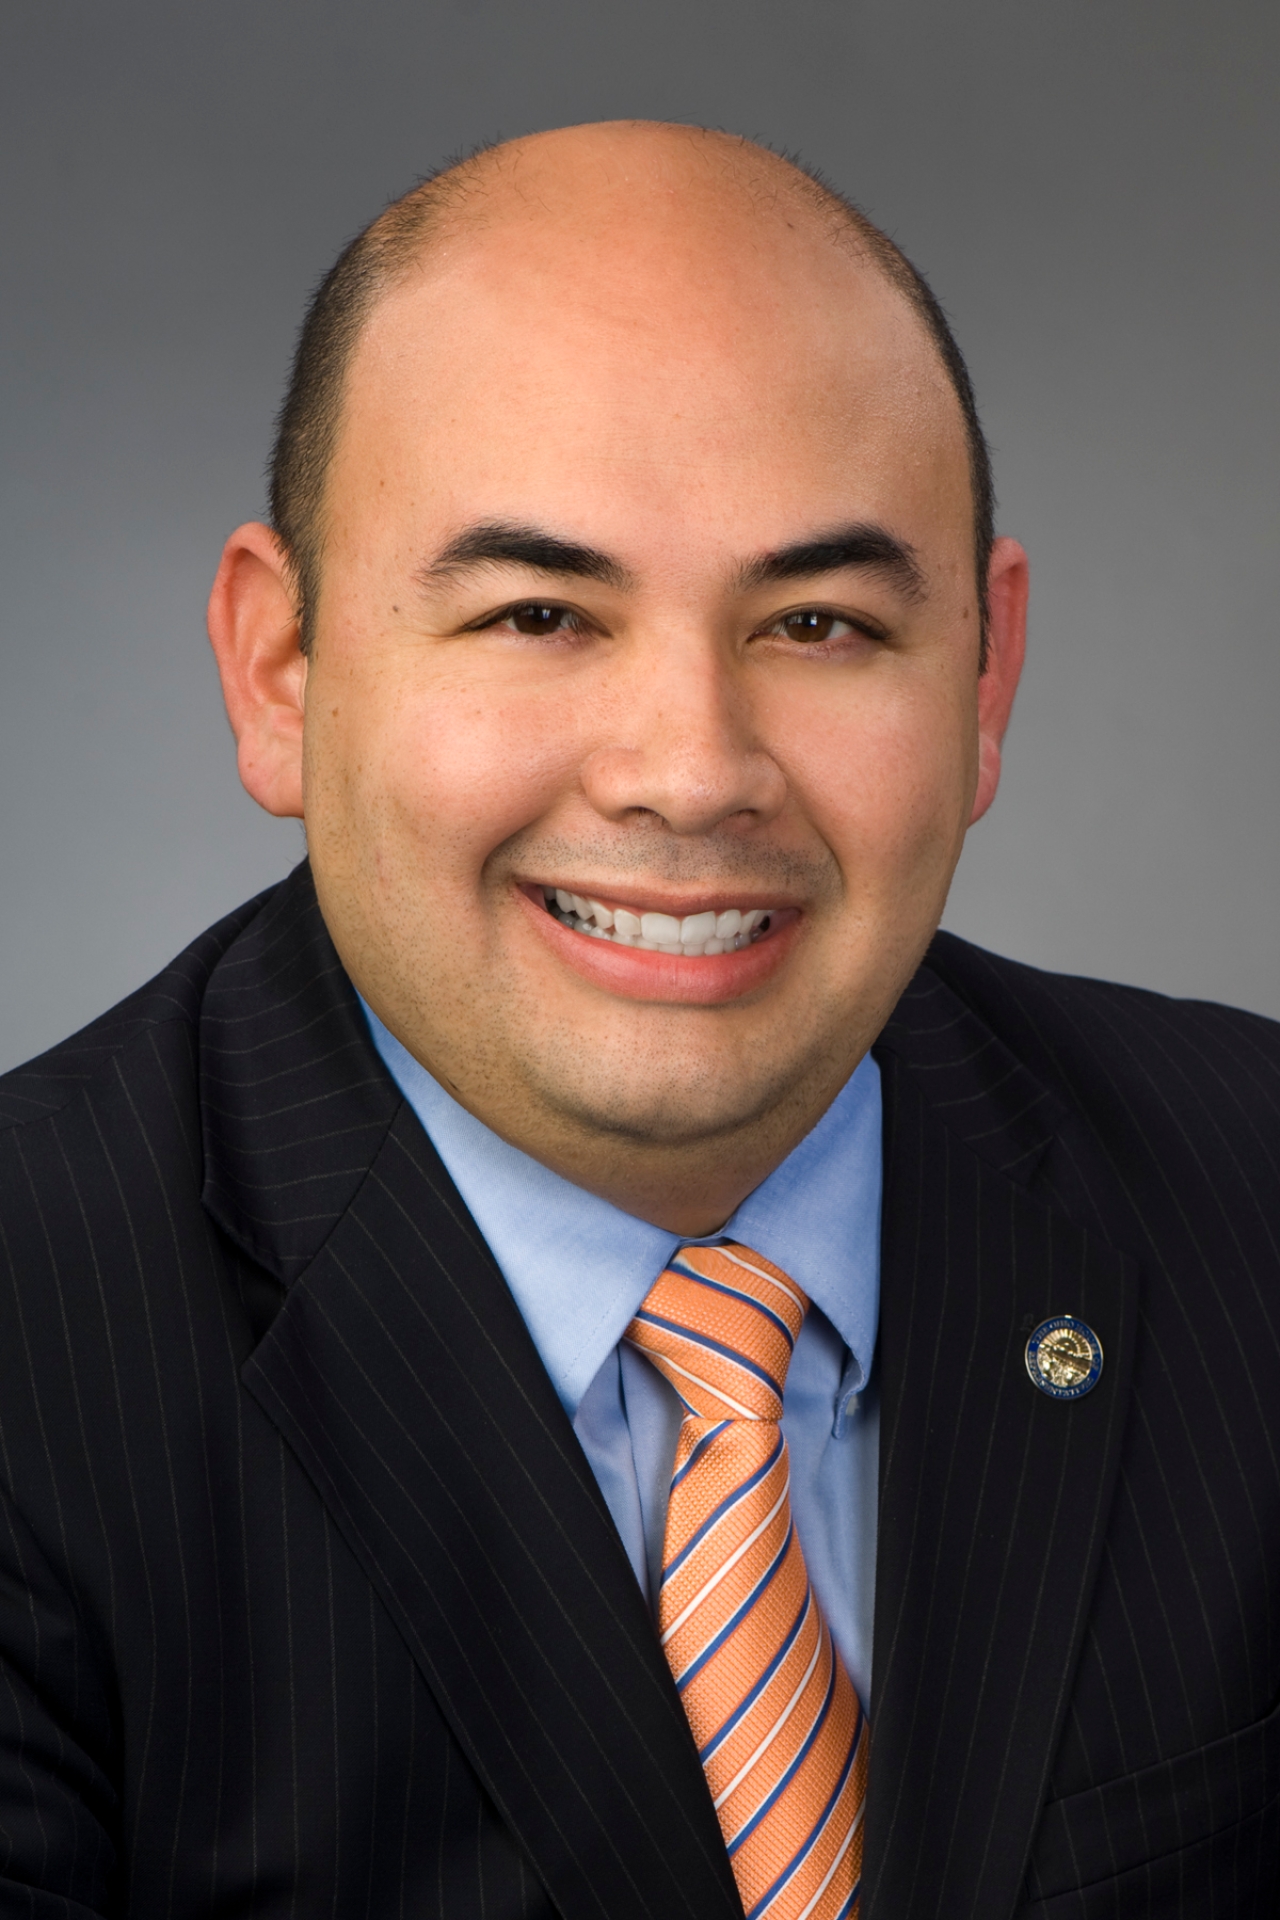 State Rep. Cliff Rosenberger Elected Speaker of the Ohio House